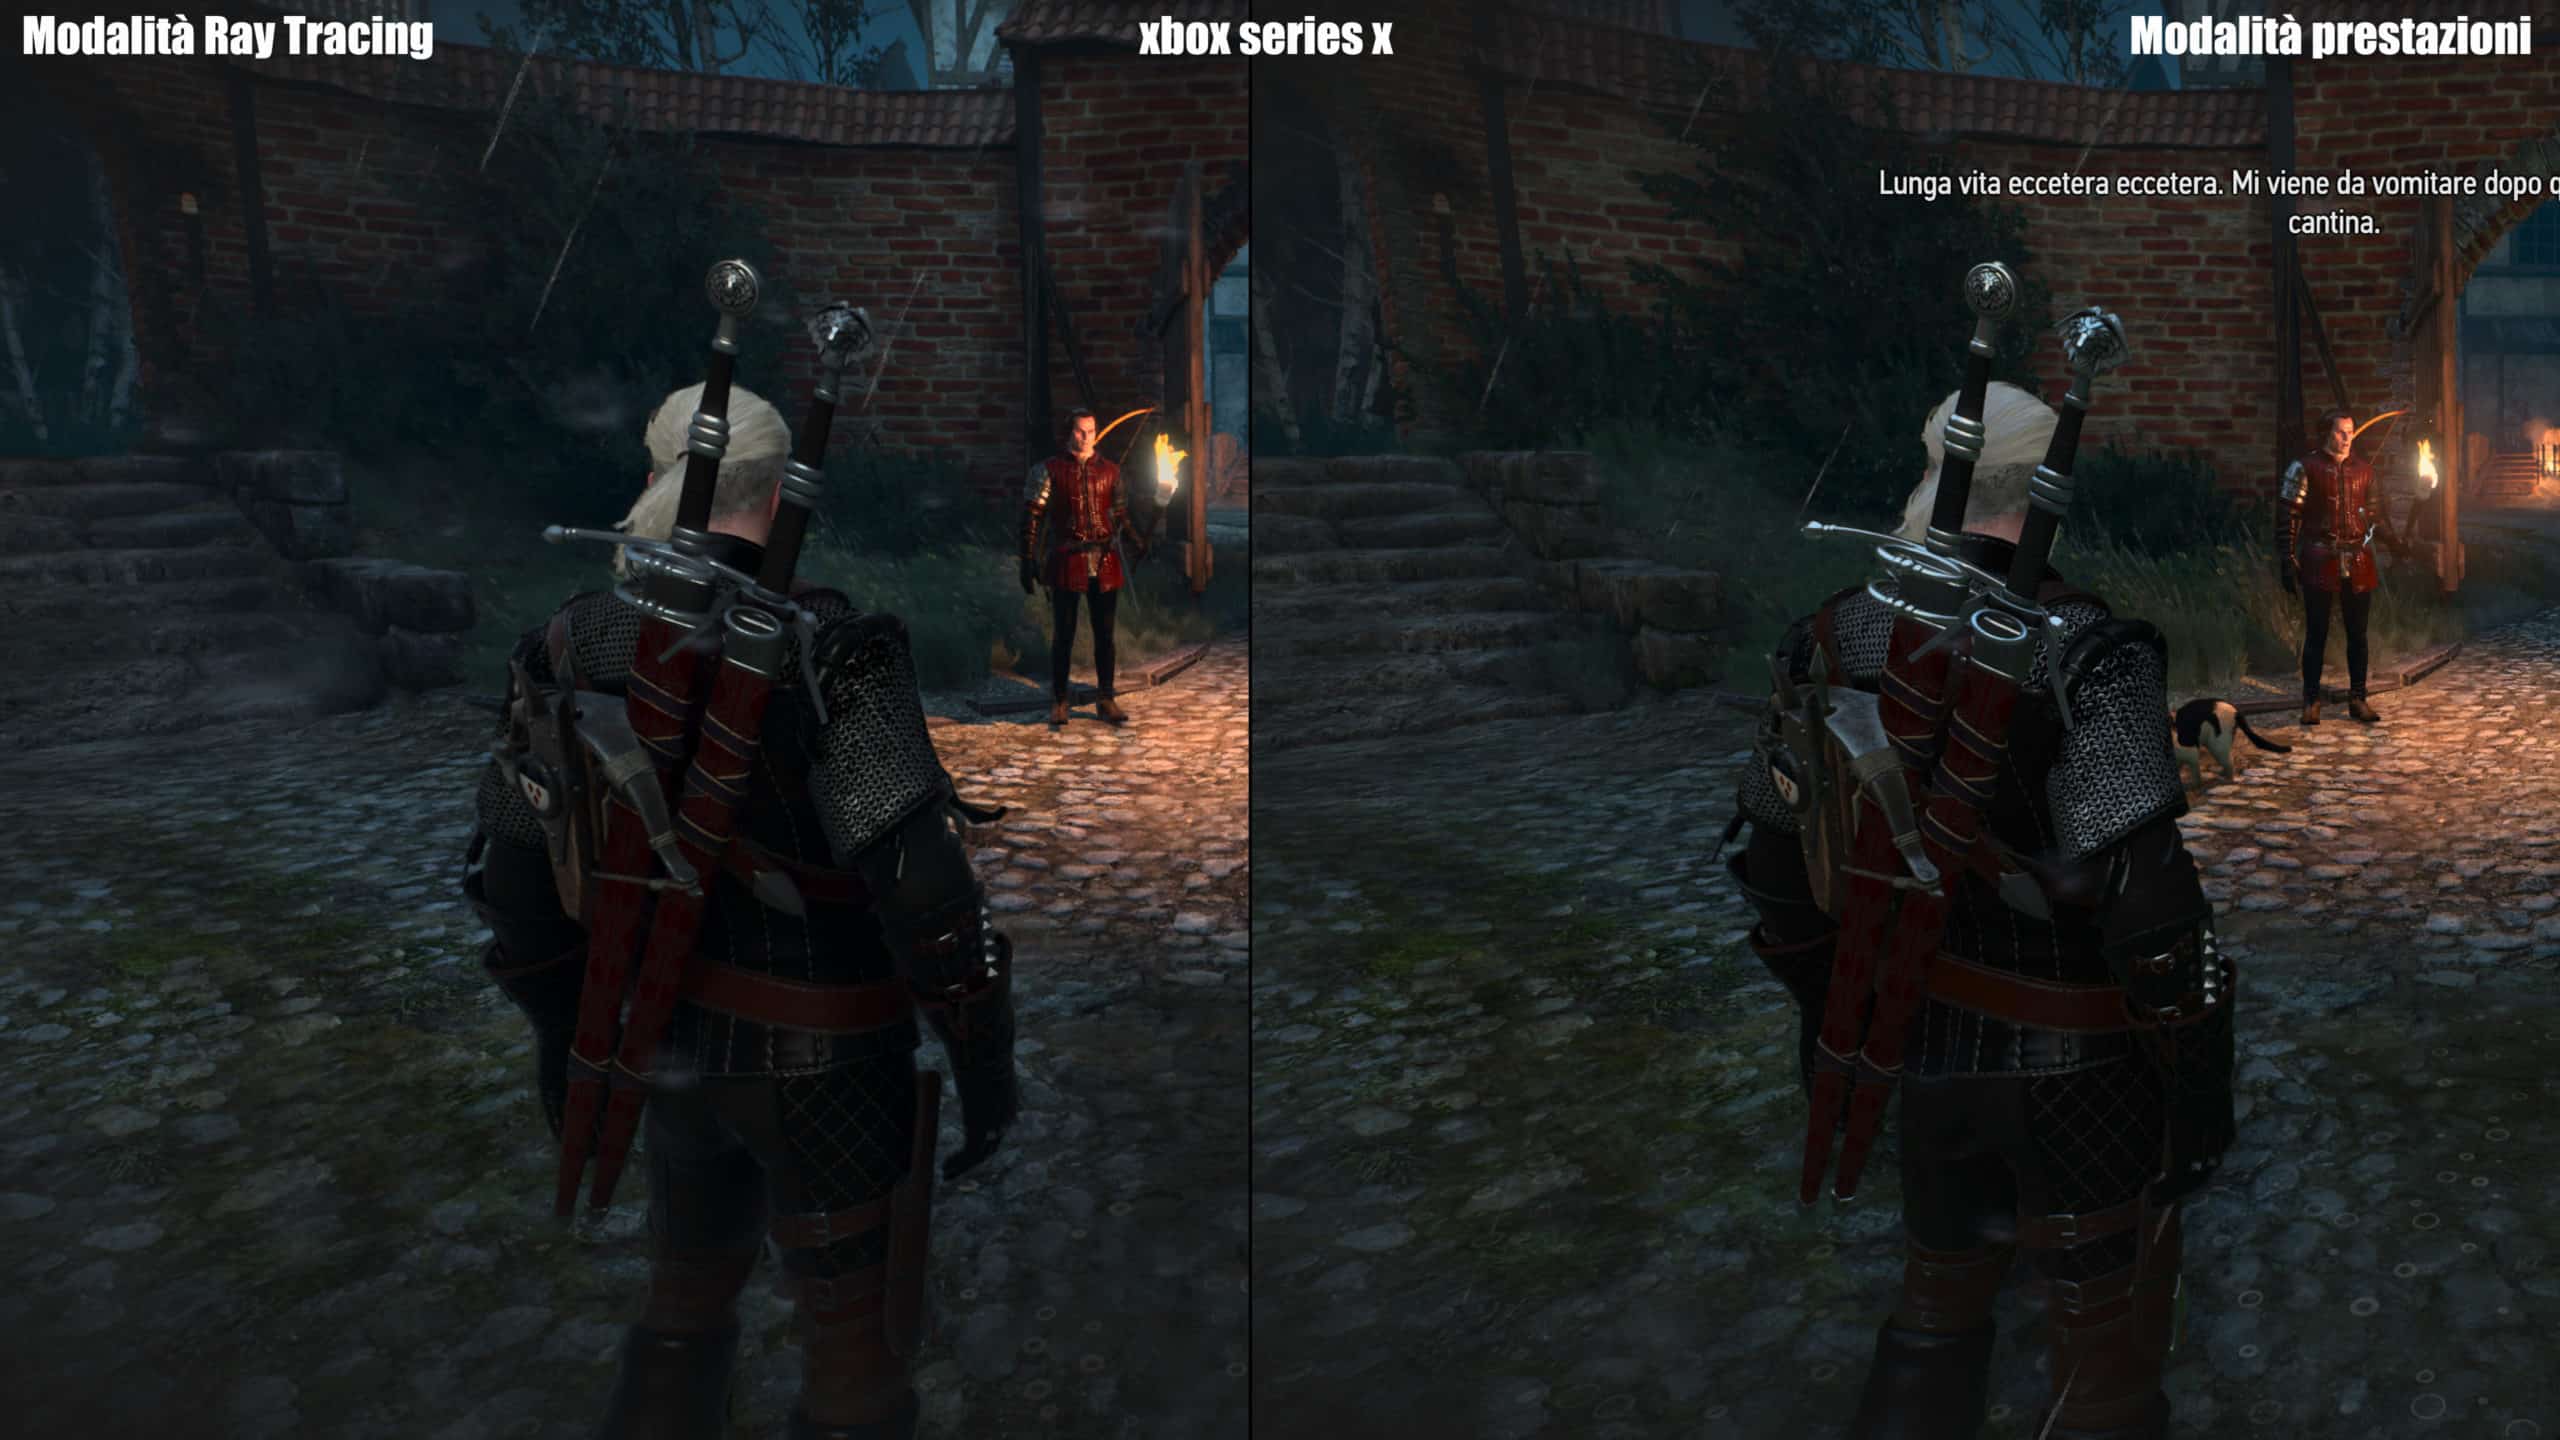 The Witcher 3 mod ray tracing vs mod frame-rate